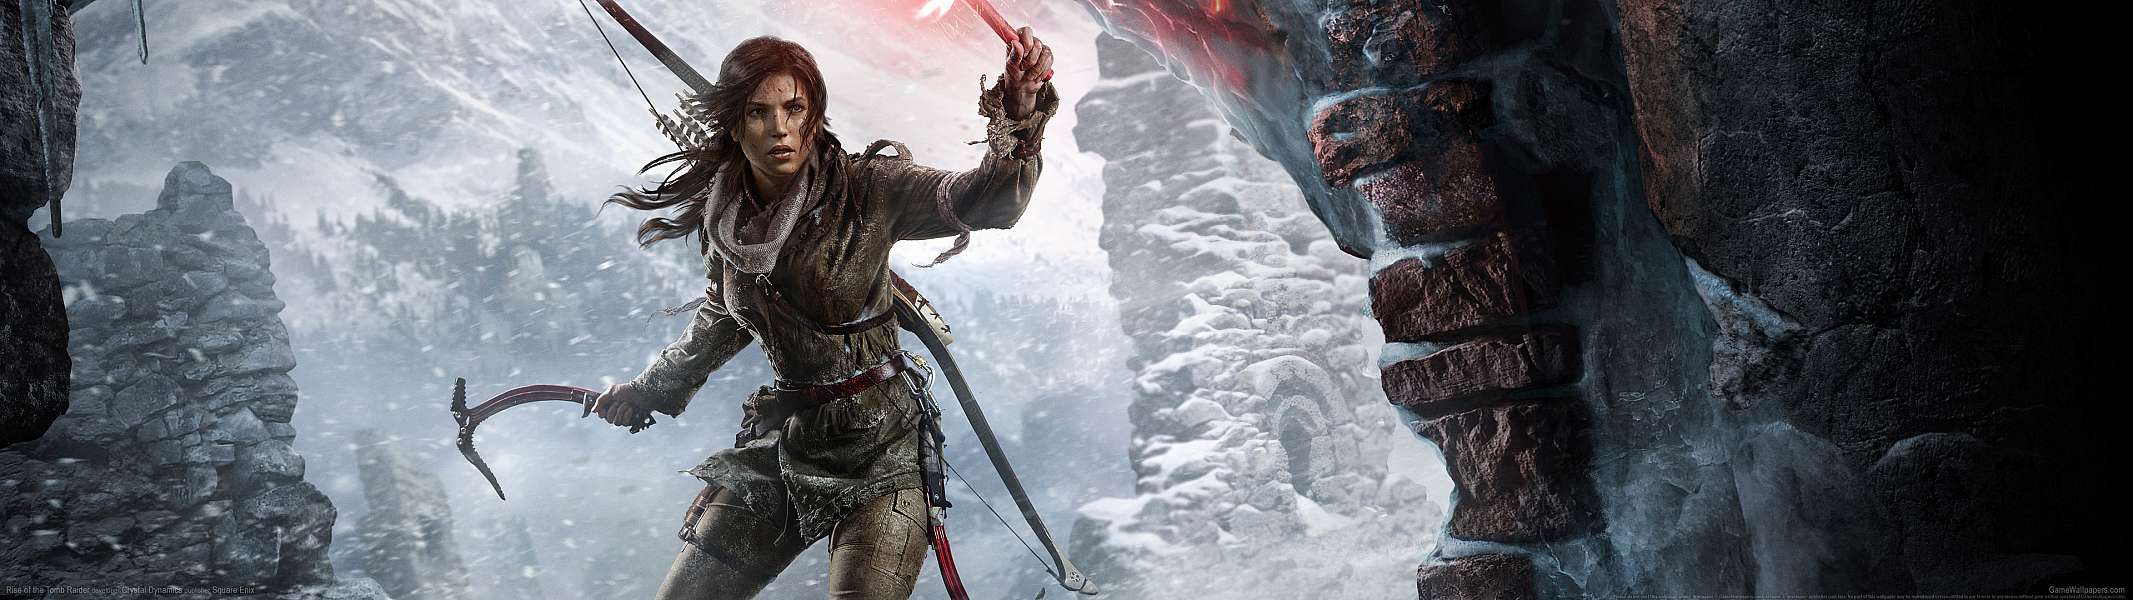 Rise of the Tomb Raider dual screen wallpaper or background